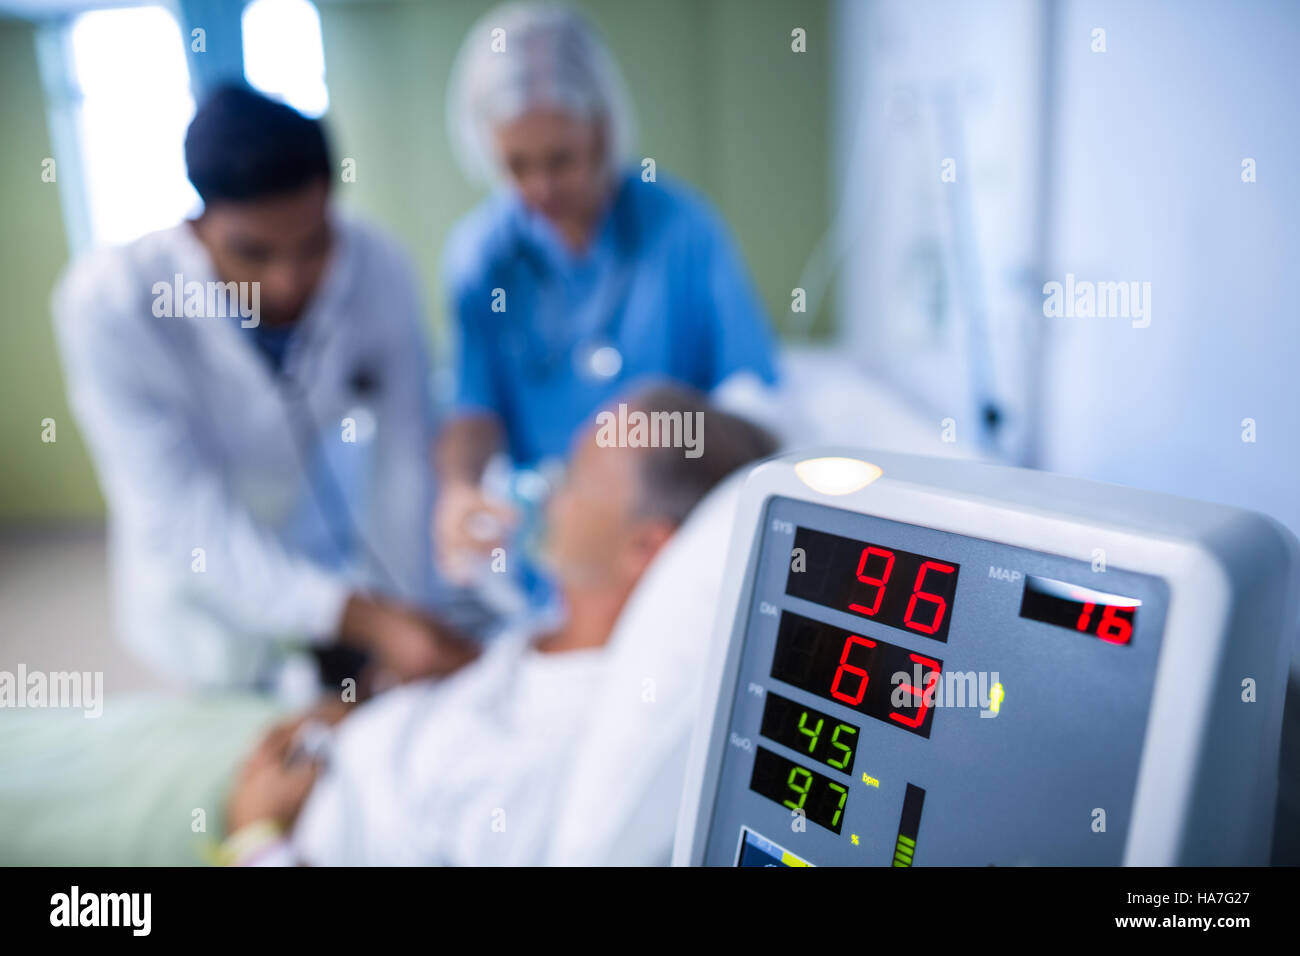 Heart rate monitor in hospital Stock Photo